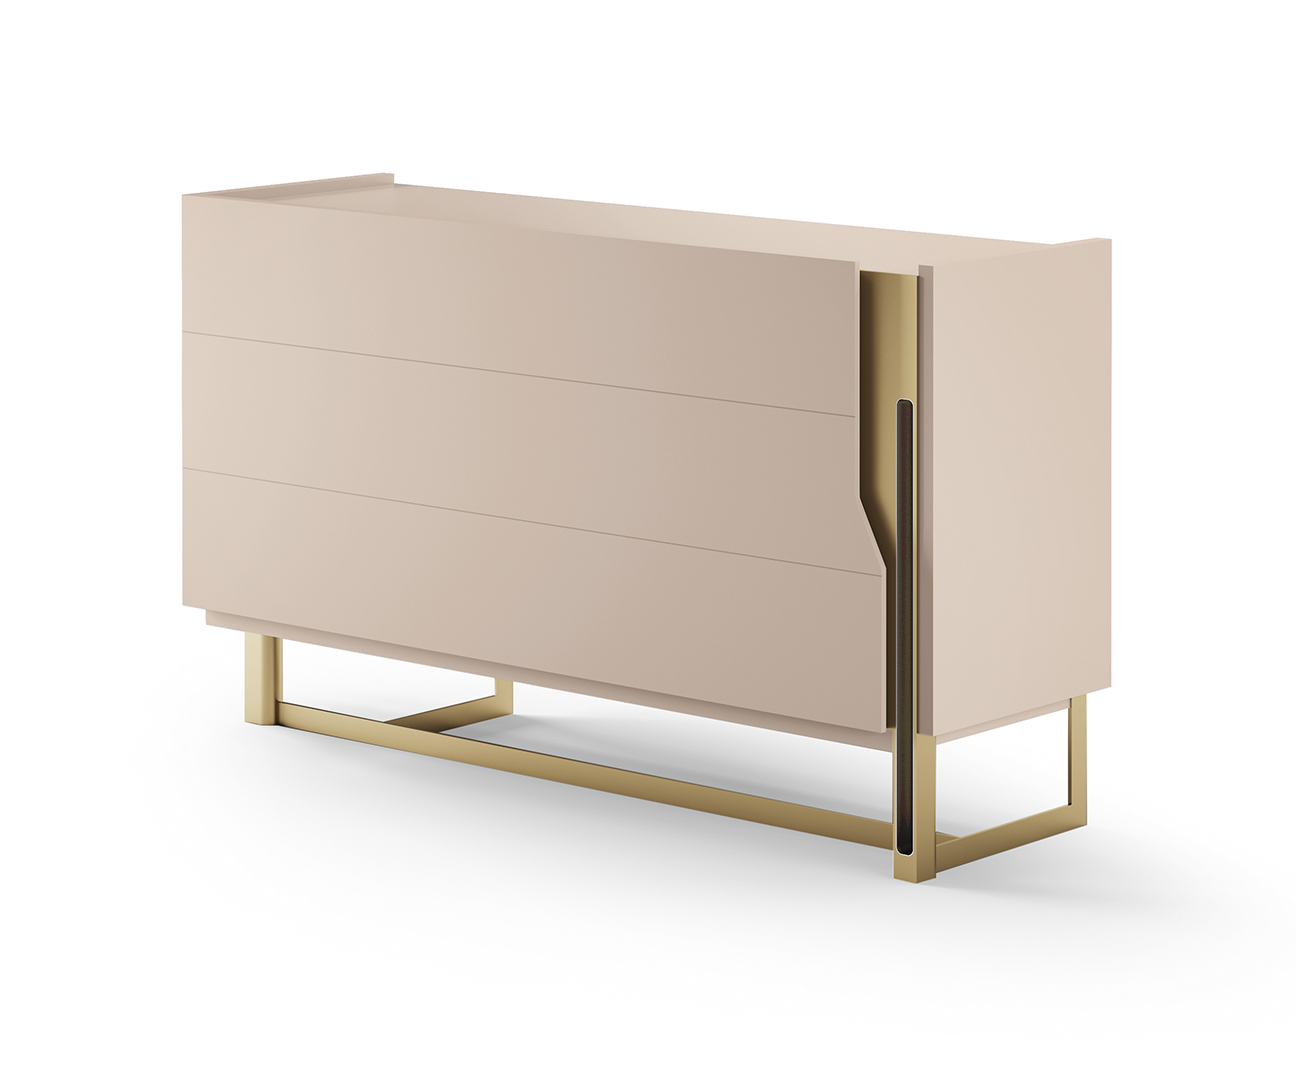 Mirage chest of drawers - Cantori